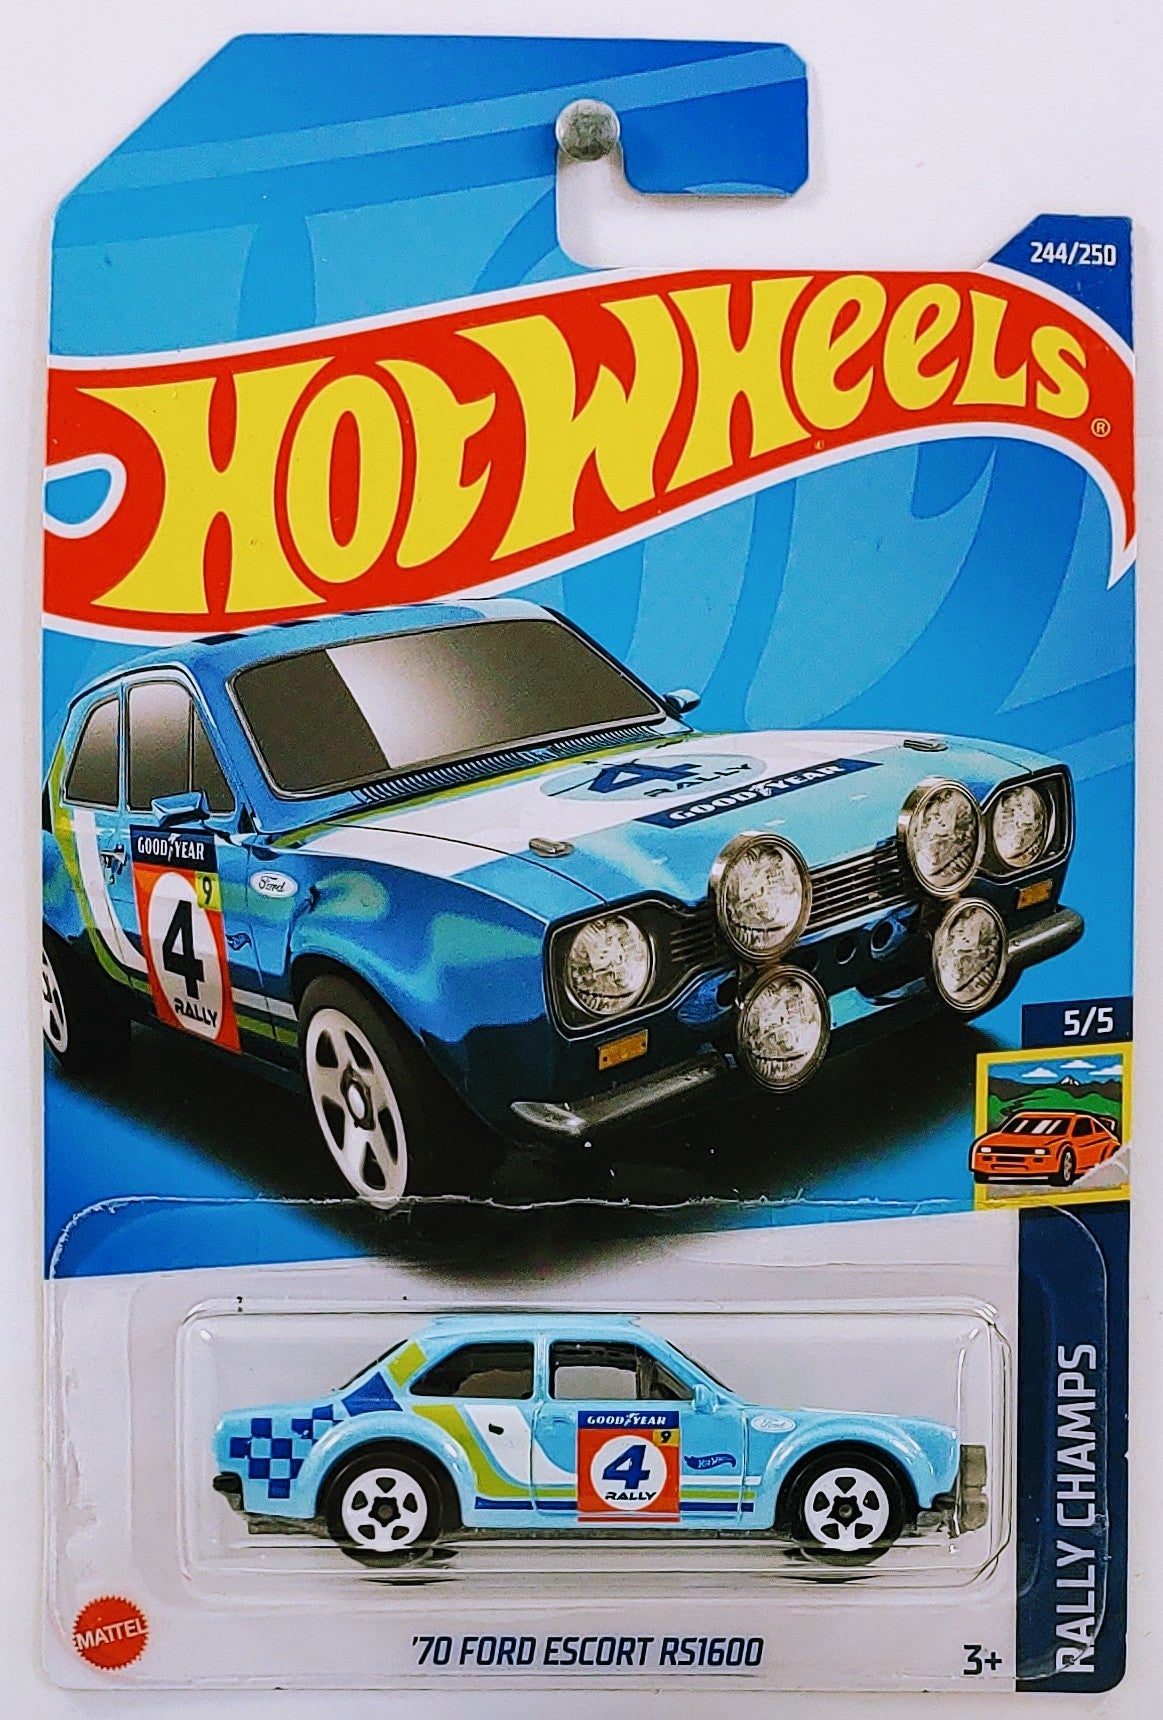 Hot Wheels 2022 - Collector # 244/250 - Rally Champs 5/5 - '70 Ford Escort RS1600 - Blue / #4 - IC